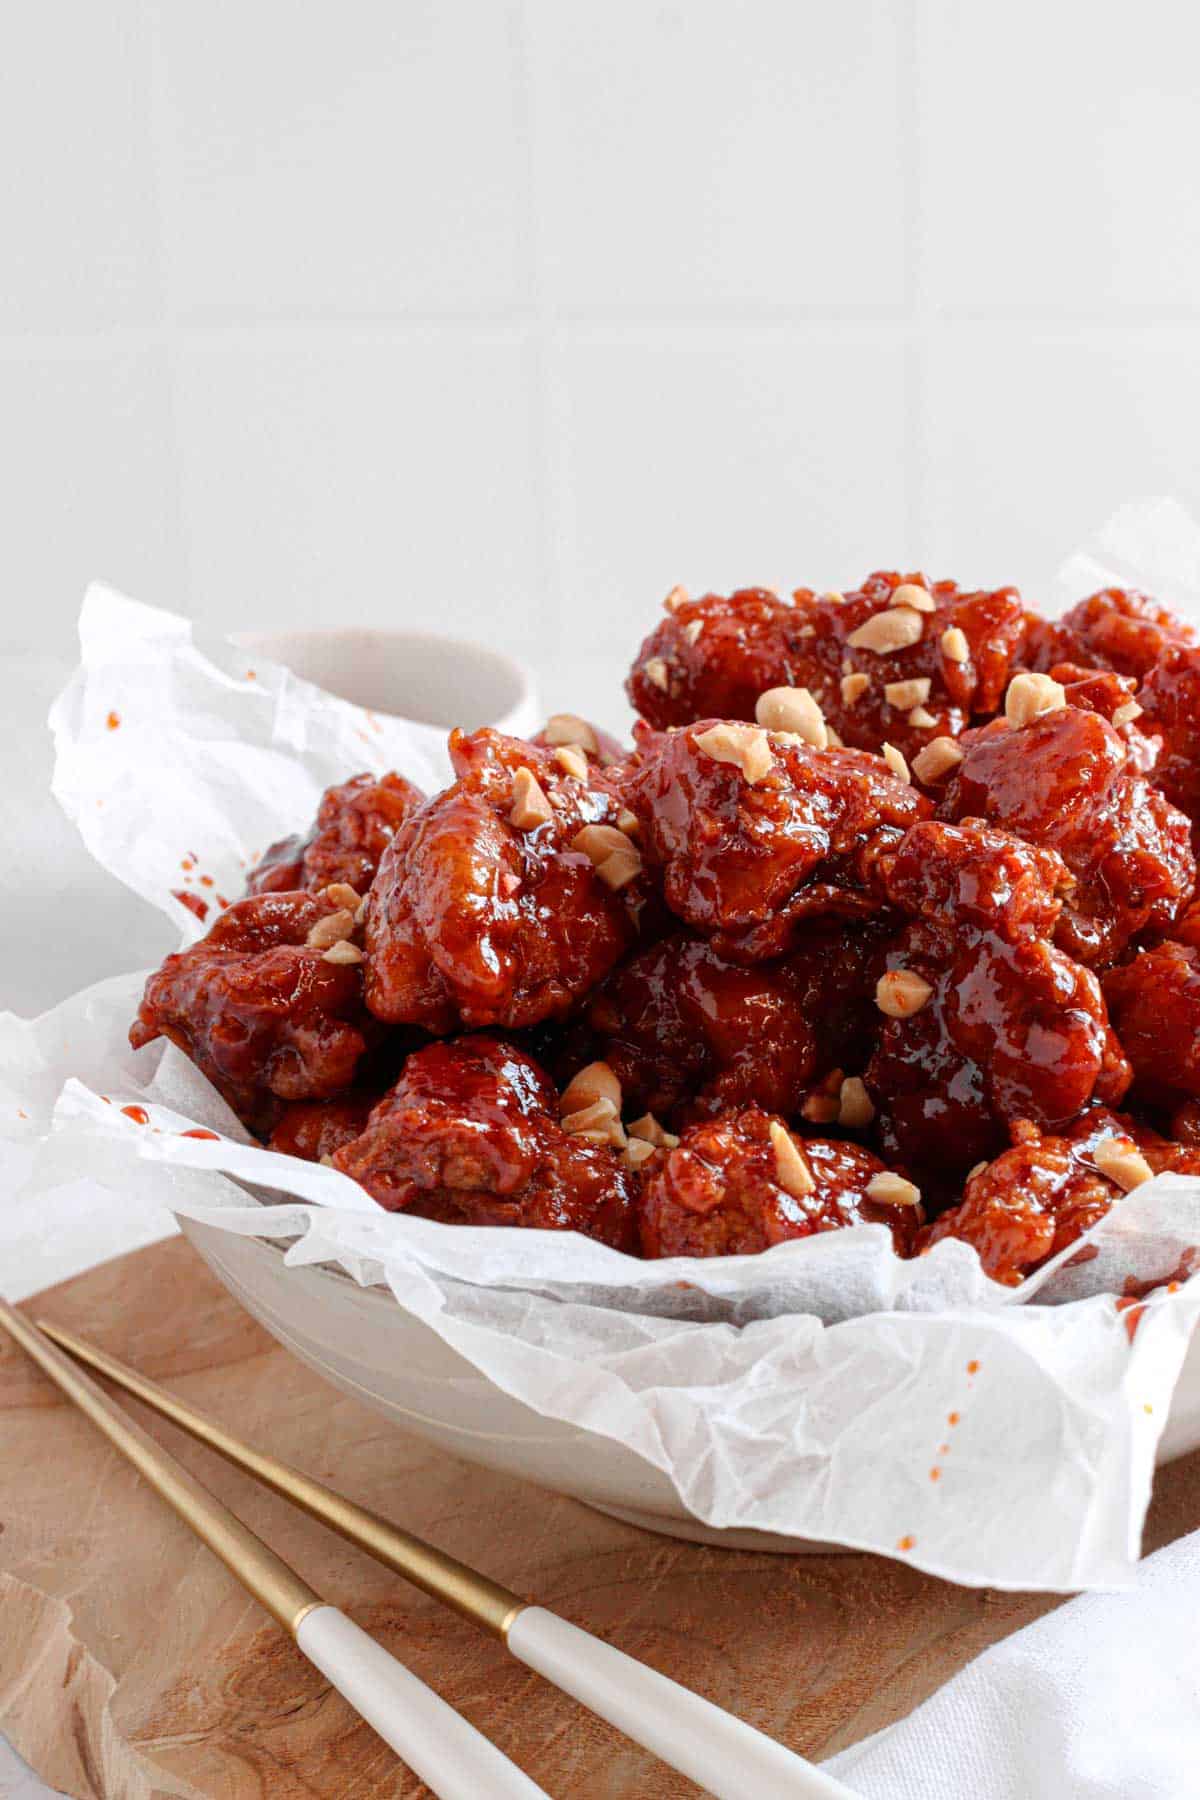 spicy Korean fried chicken is double deep fried and glazed with a sweet and spicy